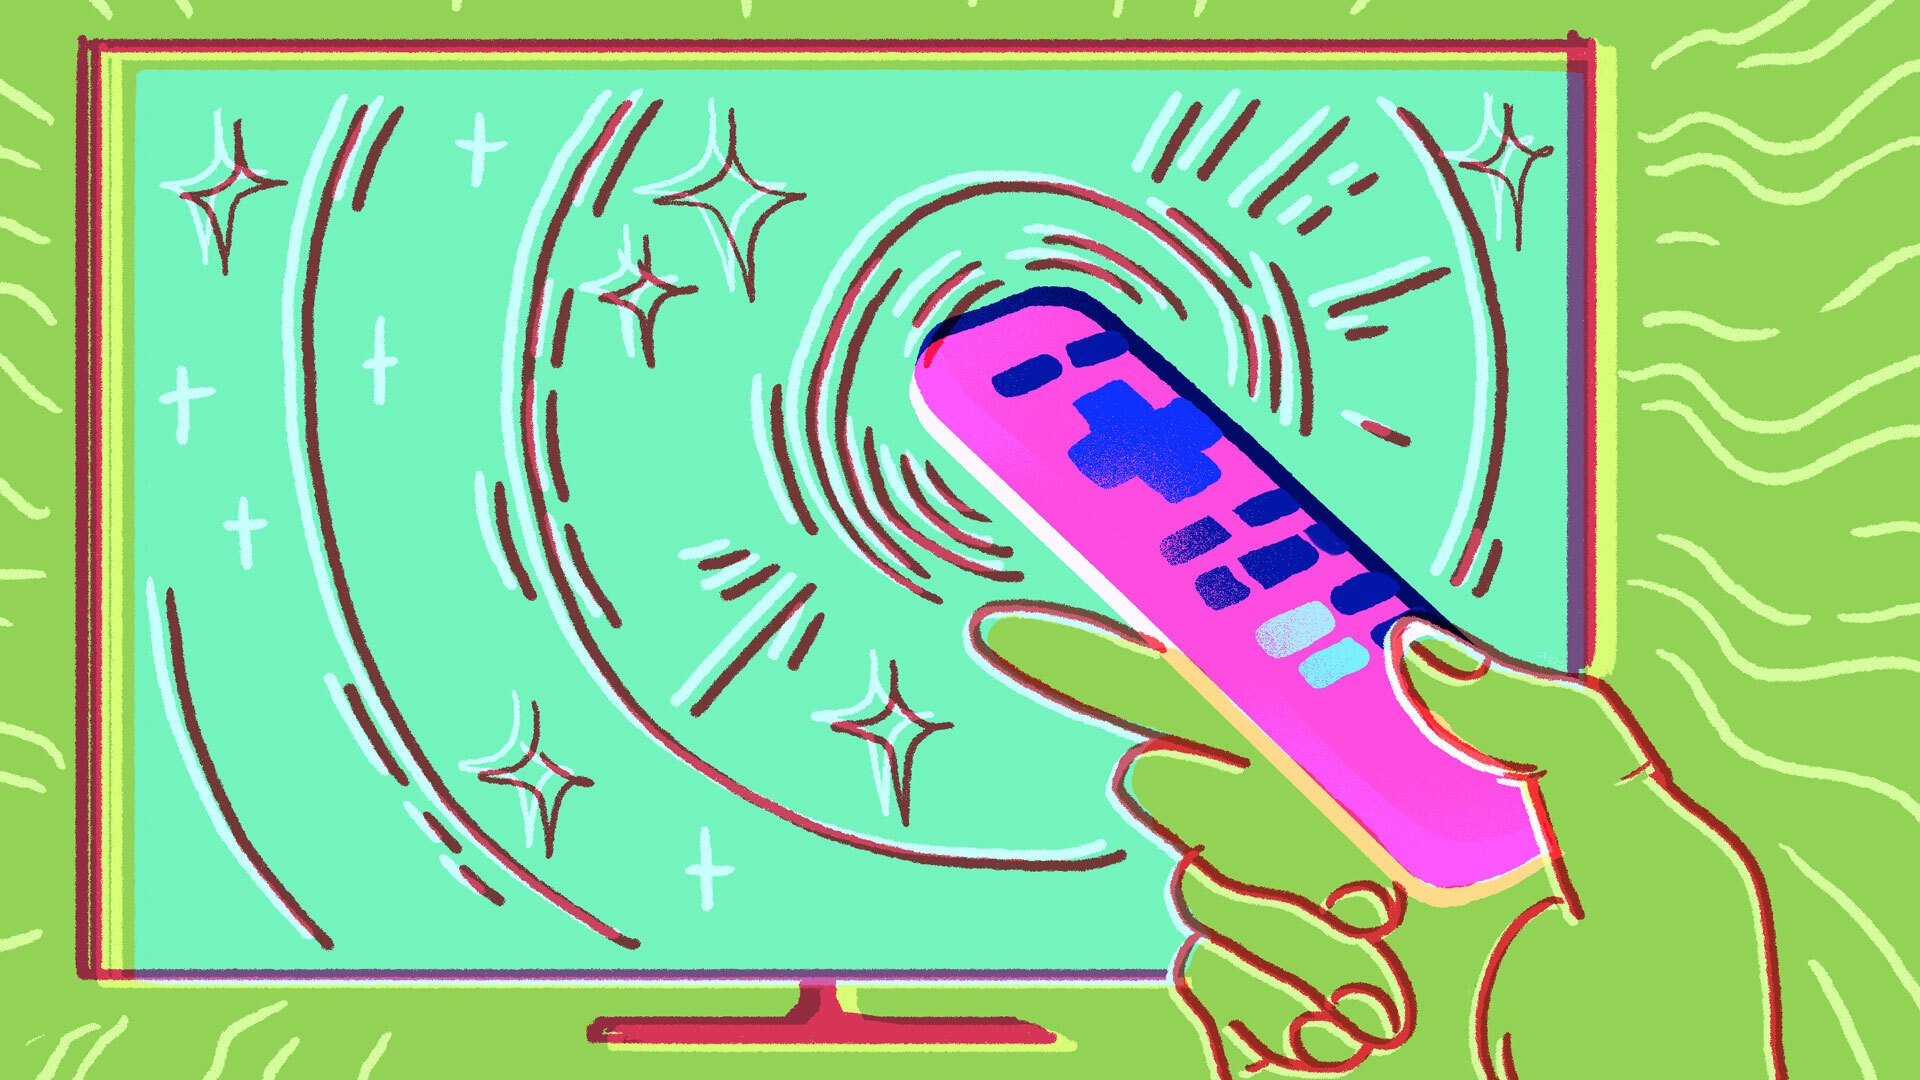 A pink remote control turns on a green TV